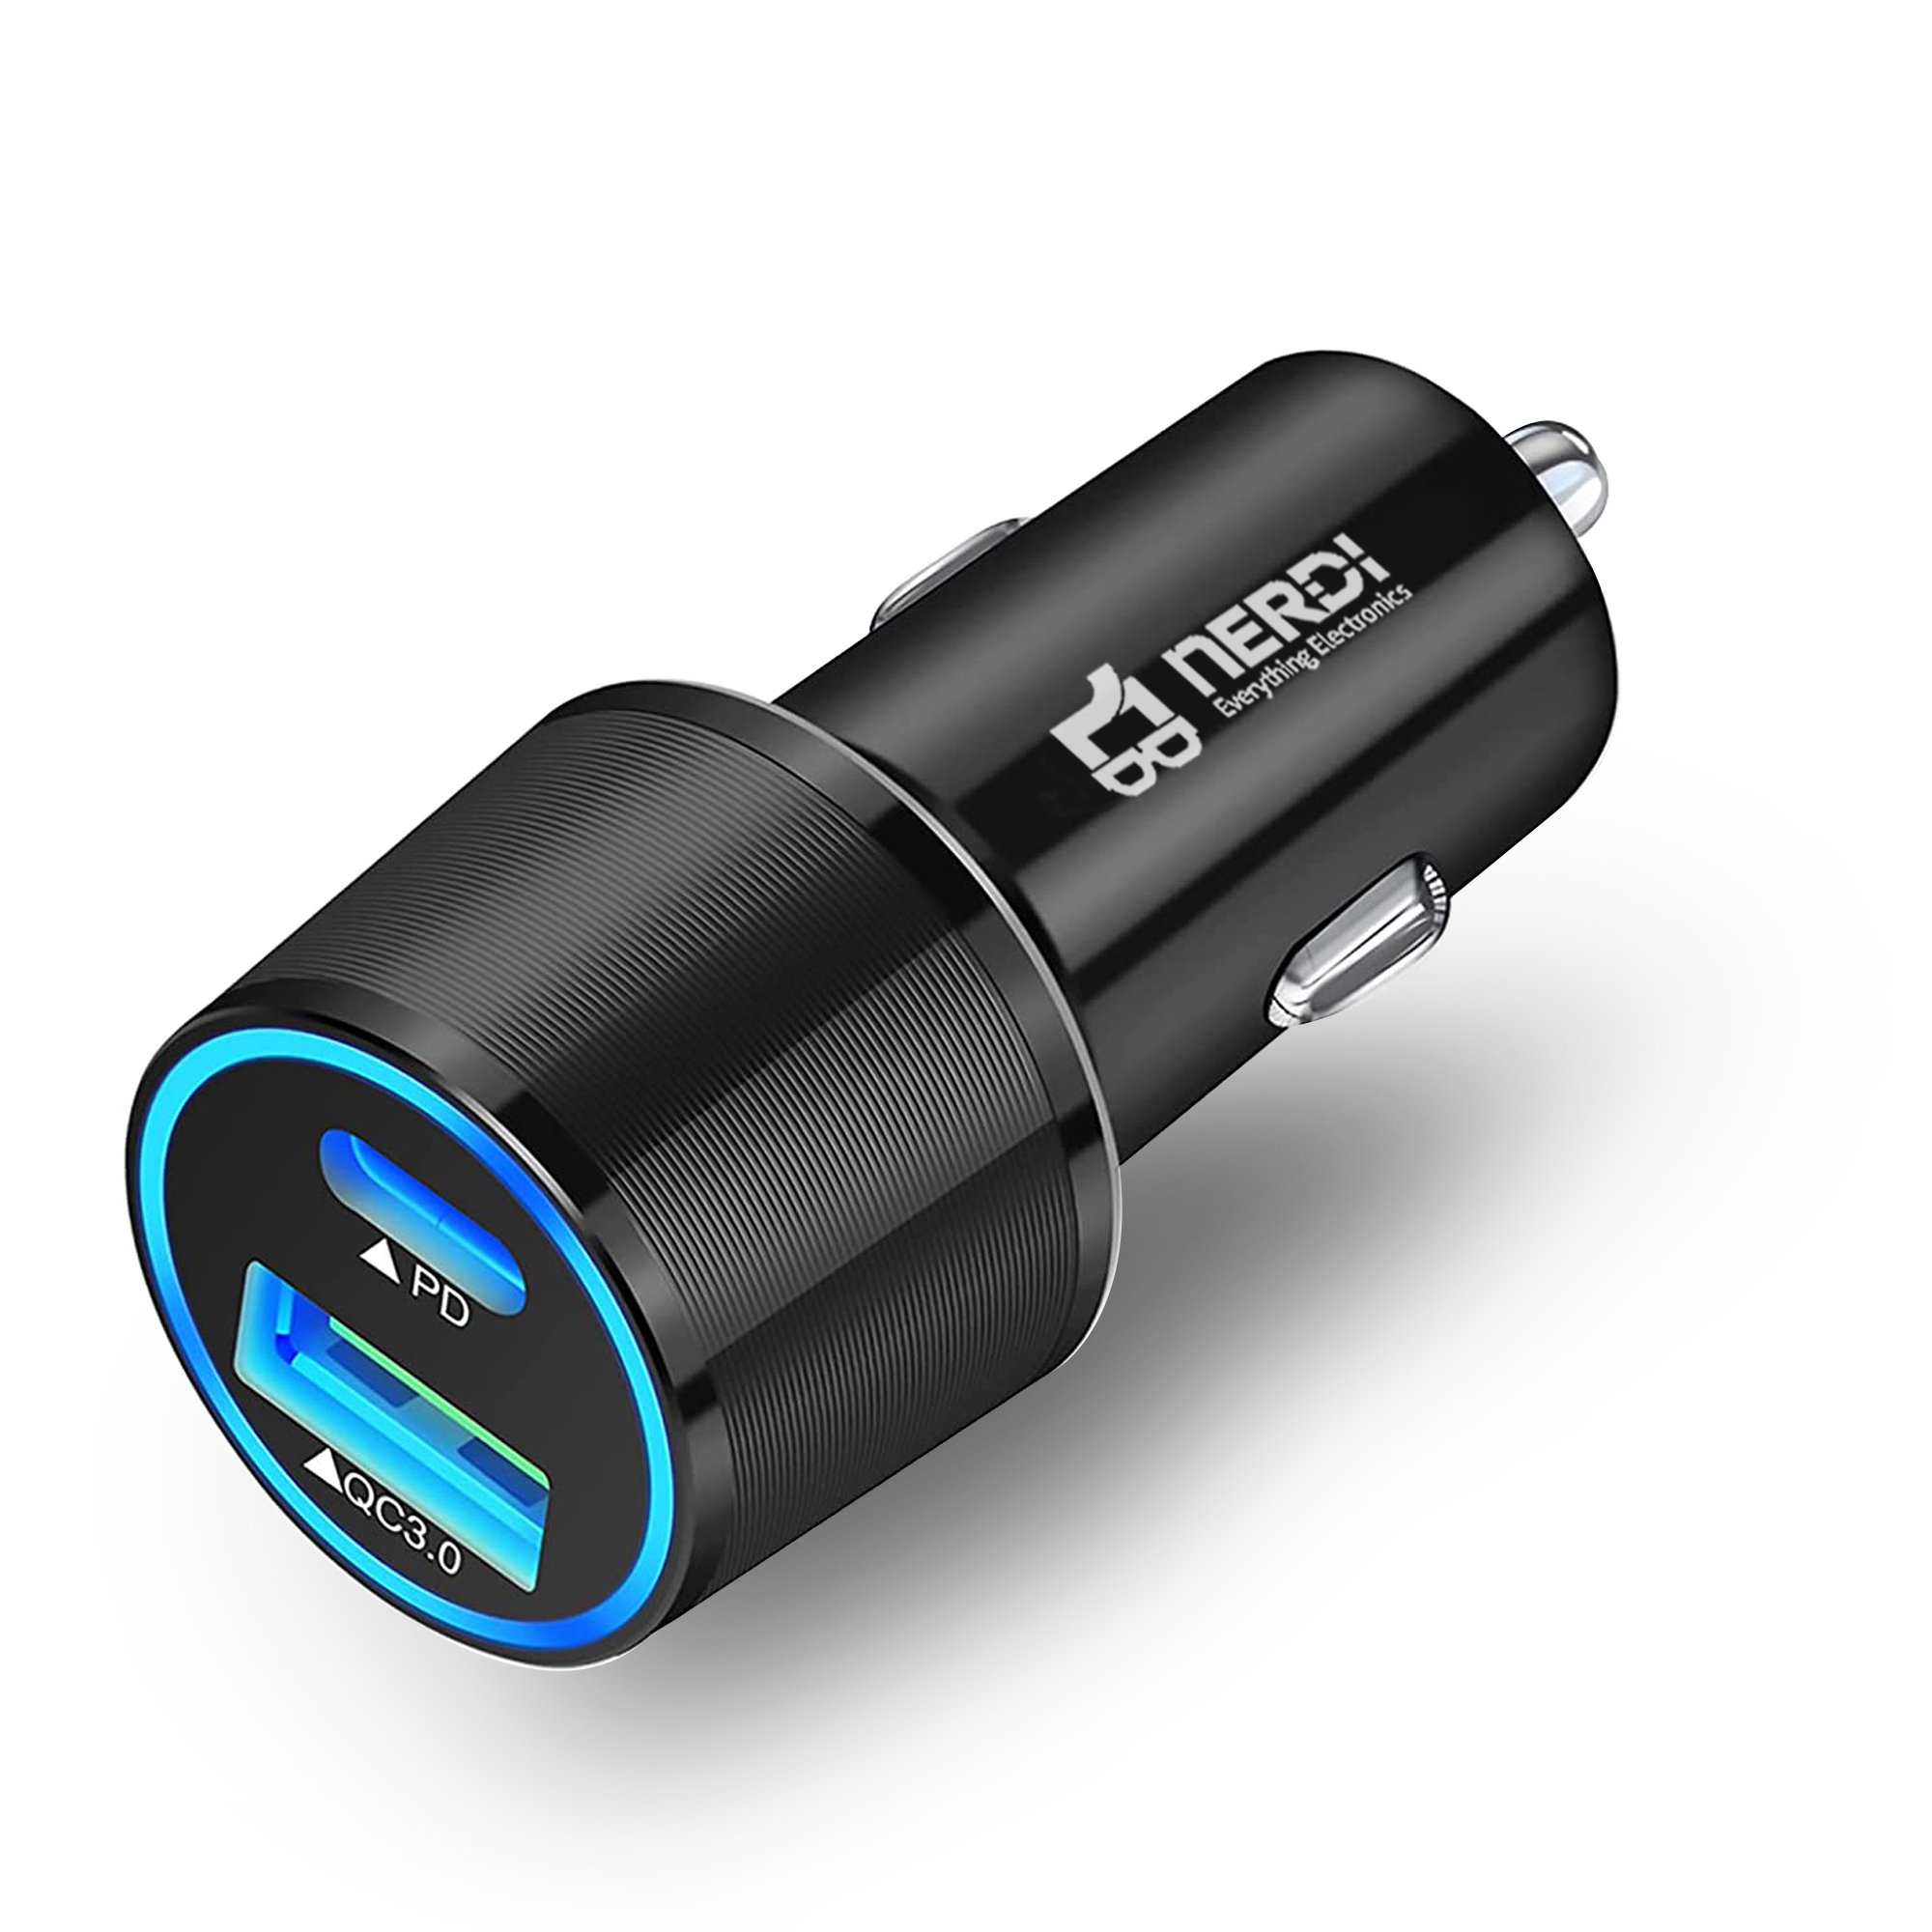 48W iPhone 13 Car Charger, Fast USB C Car Charger Adapter with Dual Port PD&QC3.0 Compatible with Apple iPhone 14/13/12/11 Mini/XR/X/XS/Pro/ProMax, iPad Pro/Samsung S21/10/10E/9/7/Plus/J7, Note8, LG - image 1 of 7